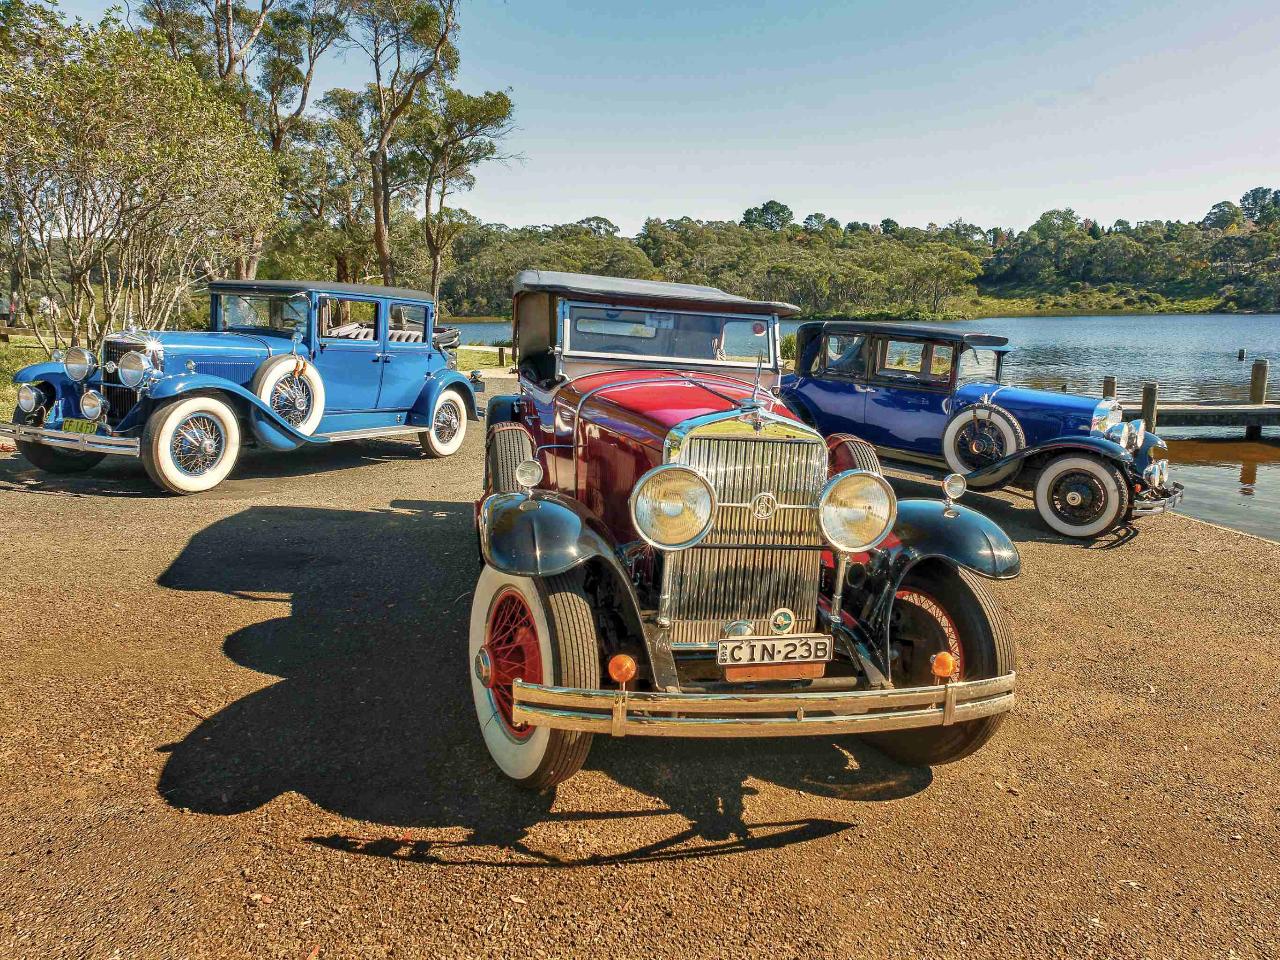 The Great Gatsby Morning or Afternoon Vintage Cadillac Tour  ( 3 hours )